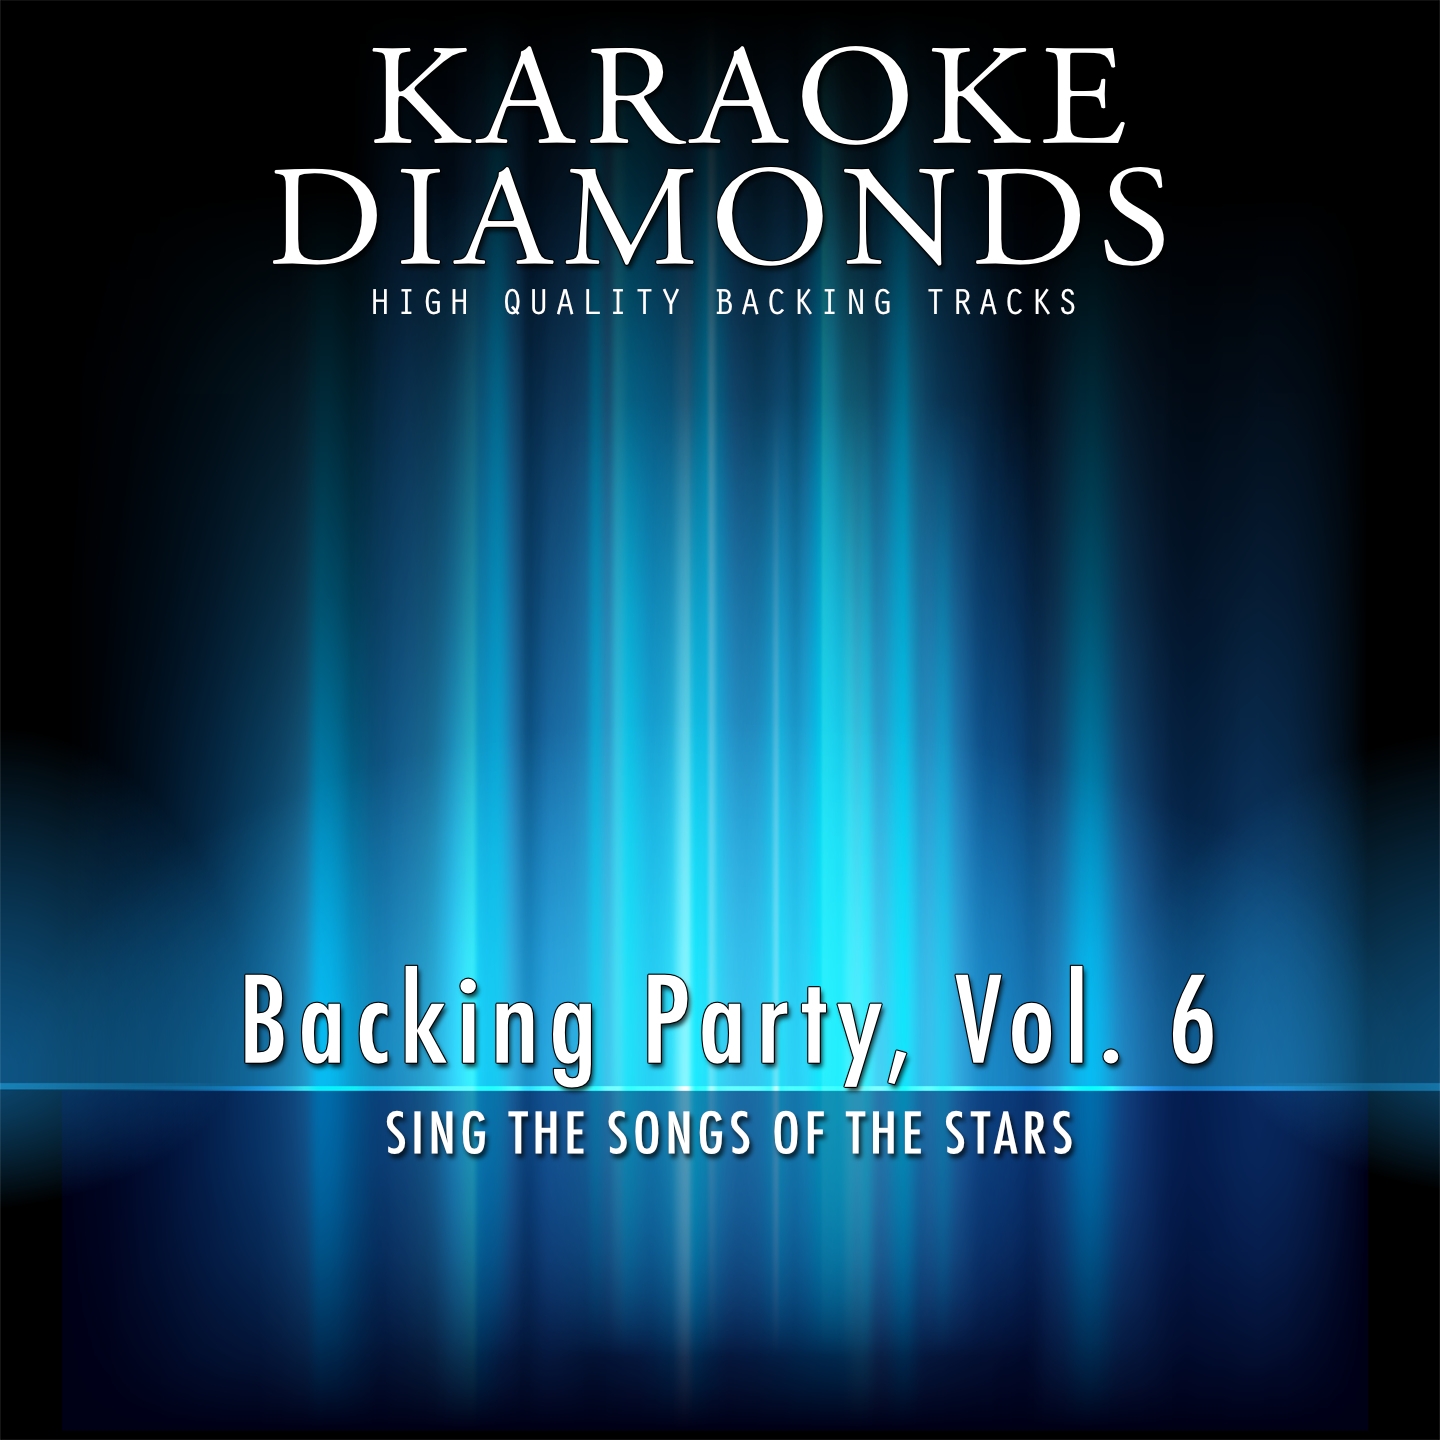 Backing Party, Vol. 6